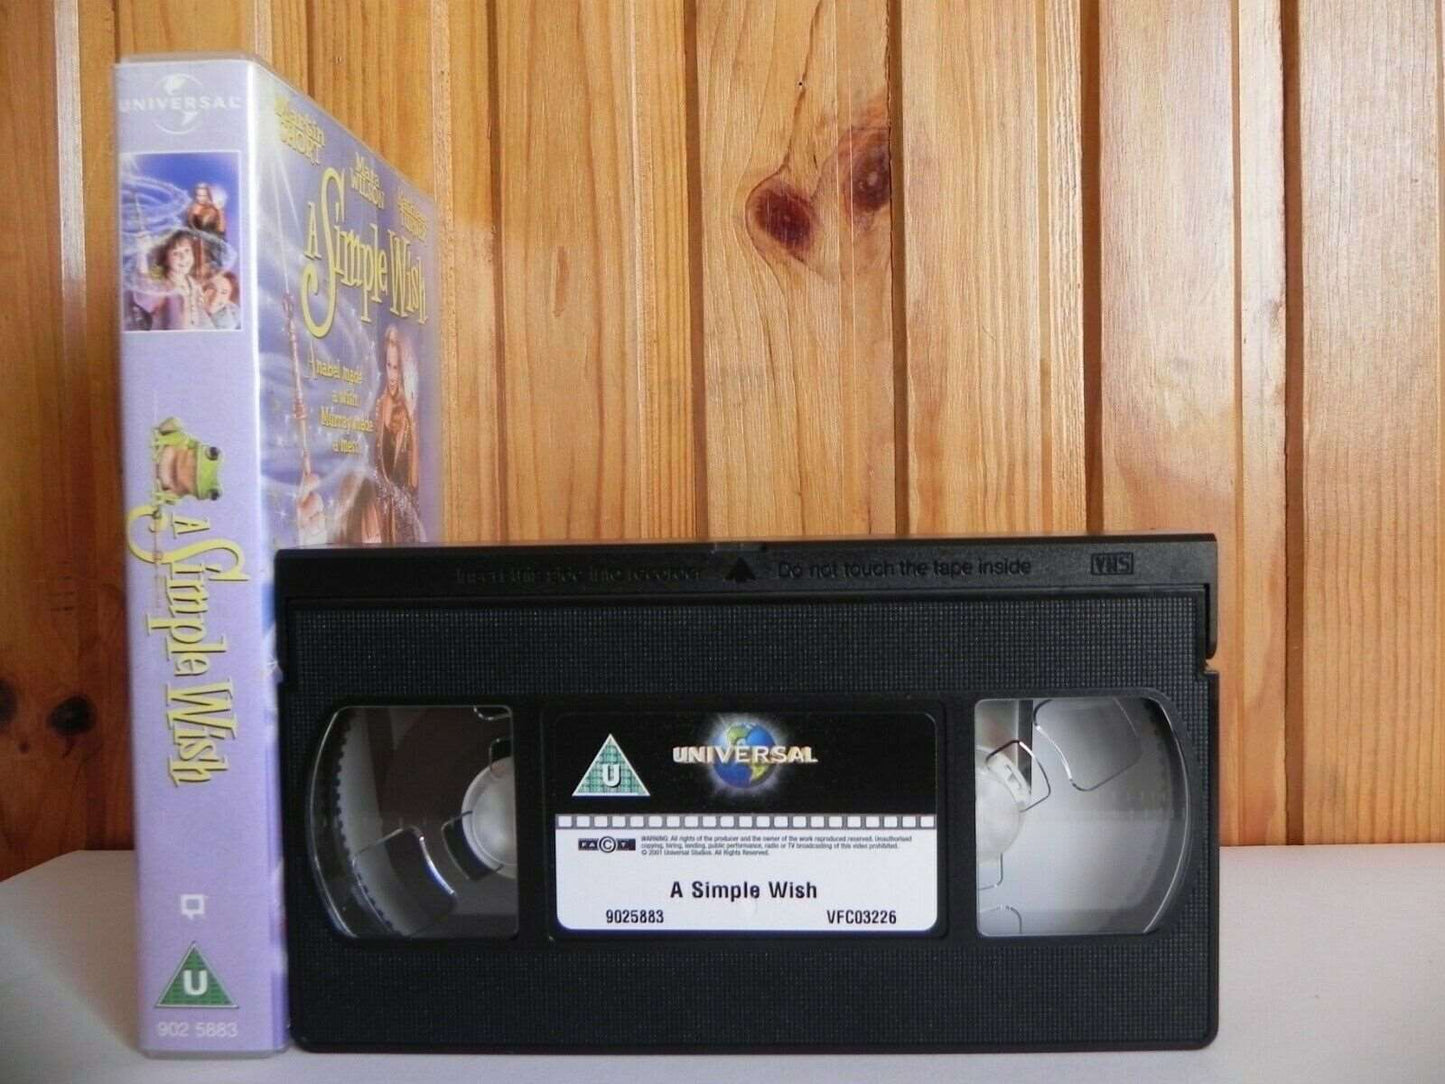 A Simple Wish - Fun Family Film - Delightful Comedy - Kathleen Turner - Pal VHS-